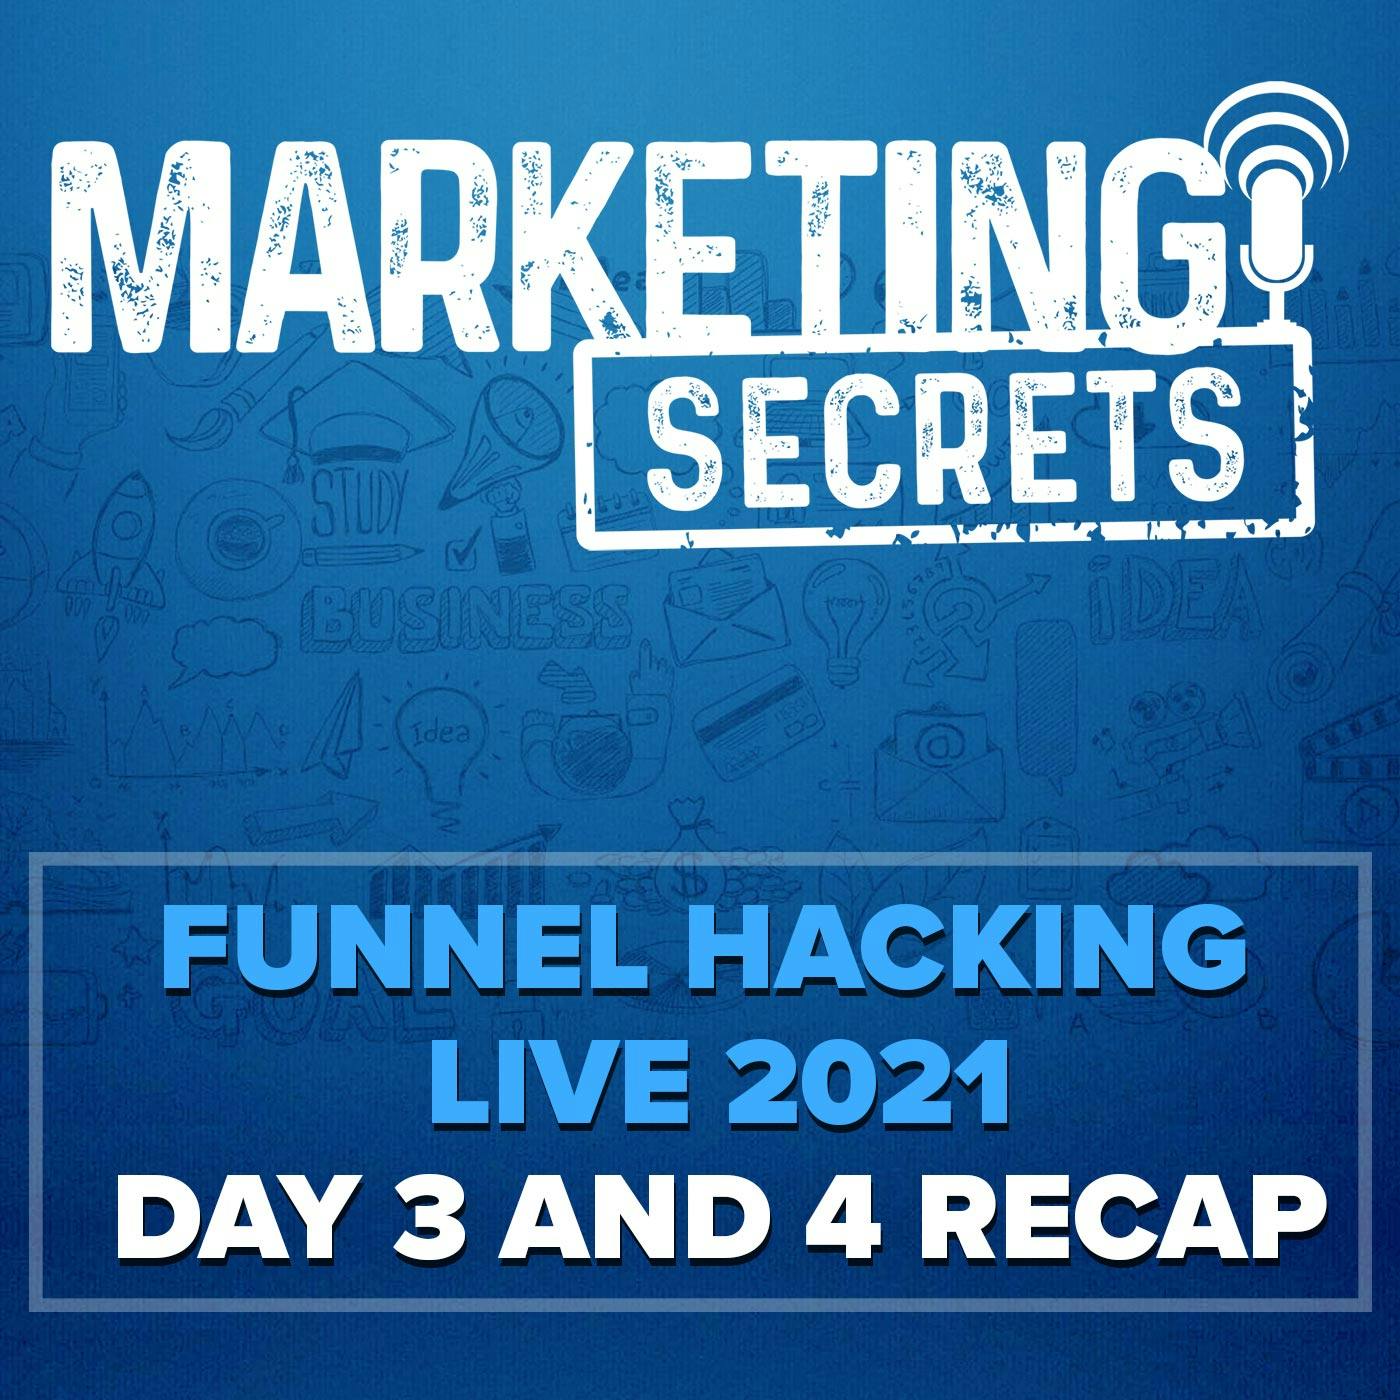 Funnel Hacking Live 2021 - Day #3 And #4 Recap